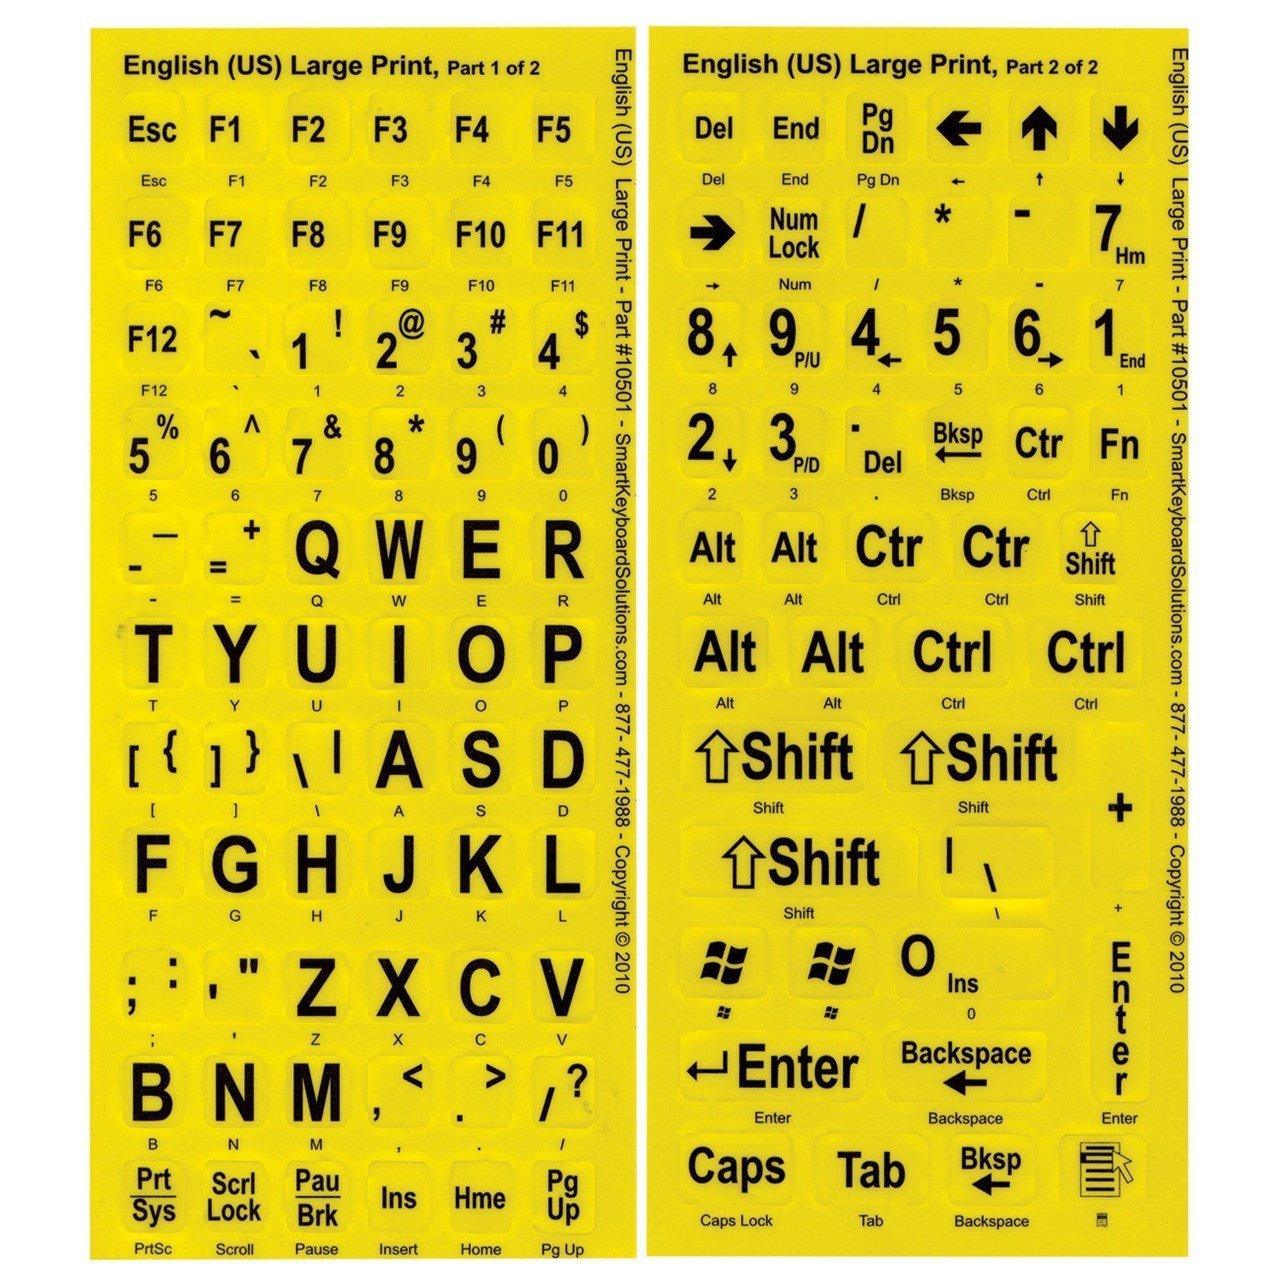 KeyBoard Labels Black on Yellow - The Low Vision Store